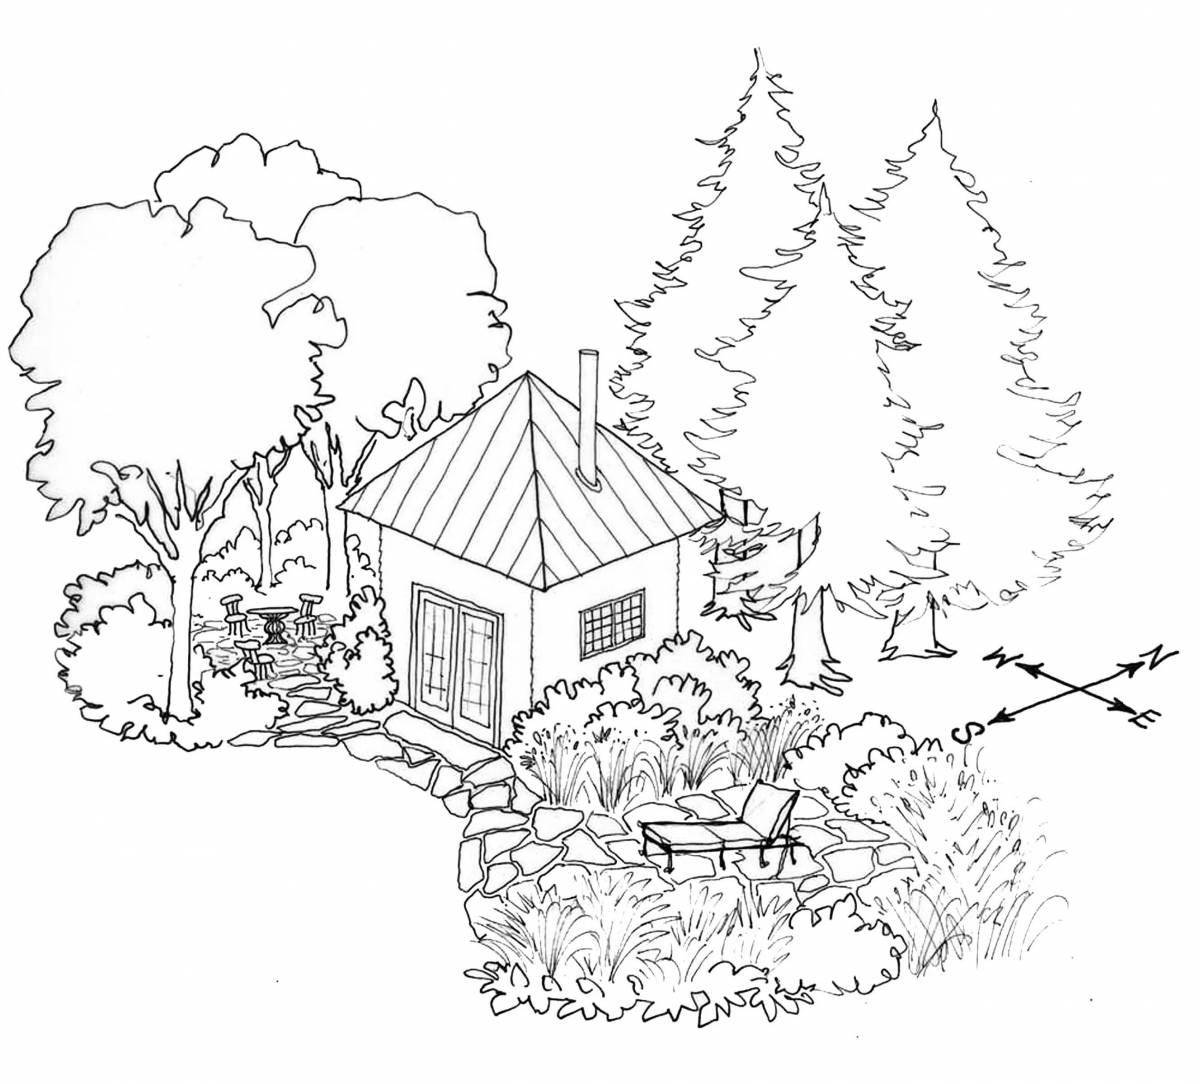 Coloring page captivating house nature